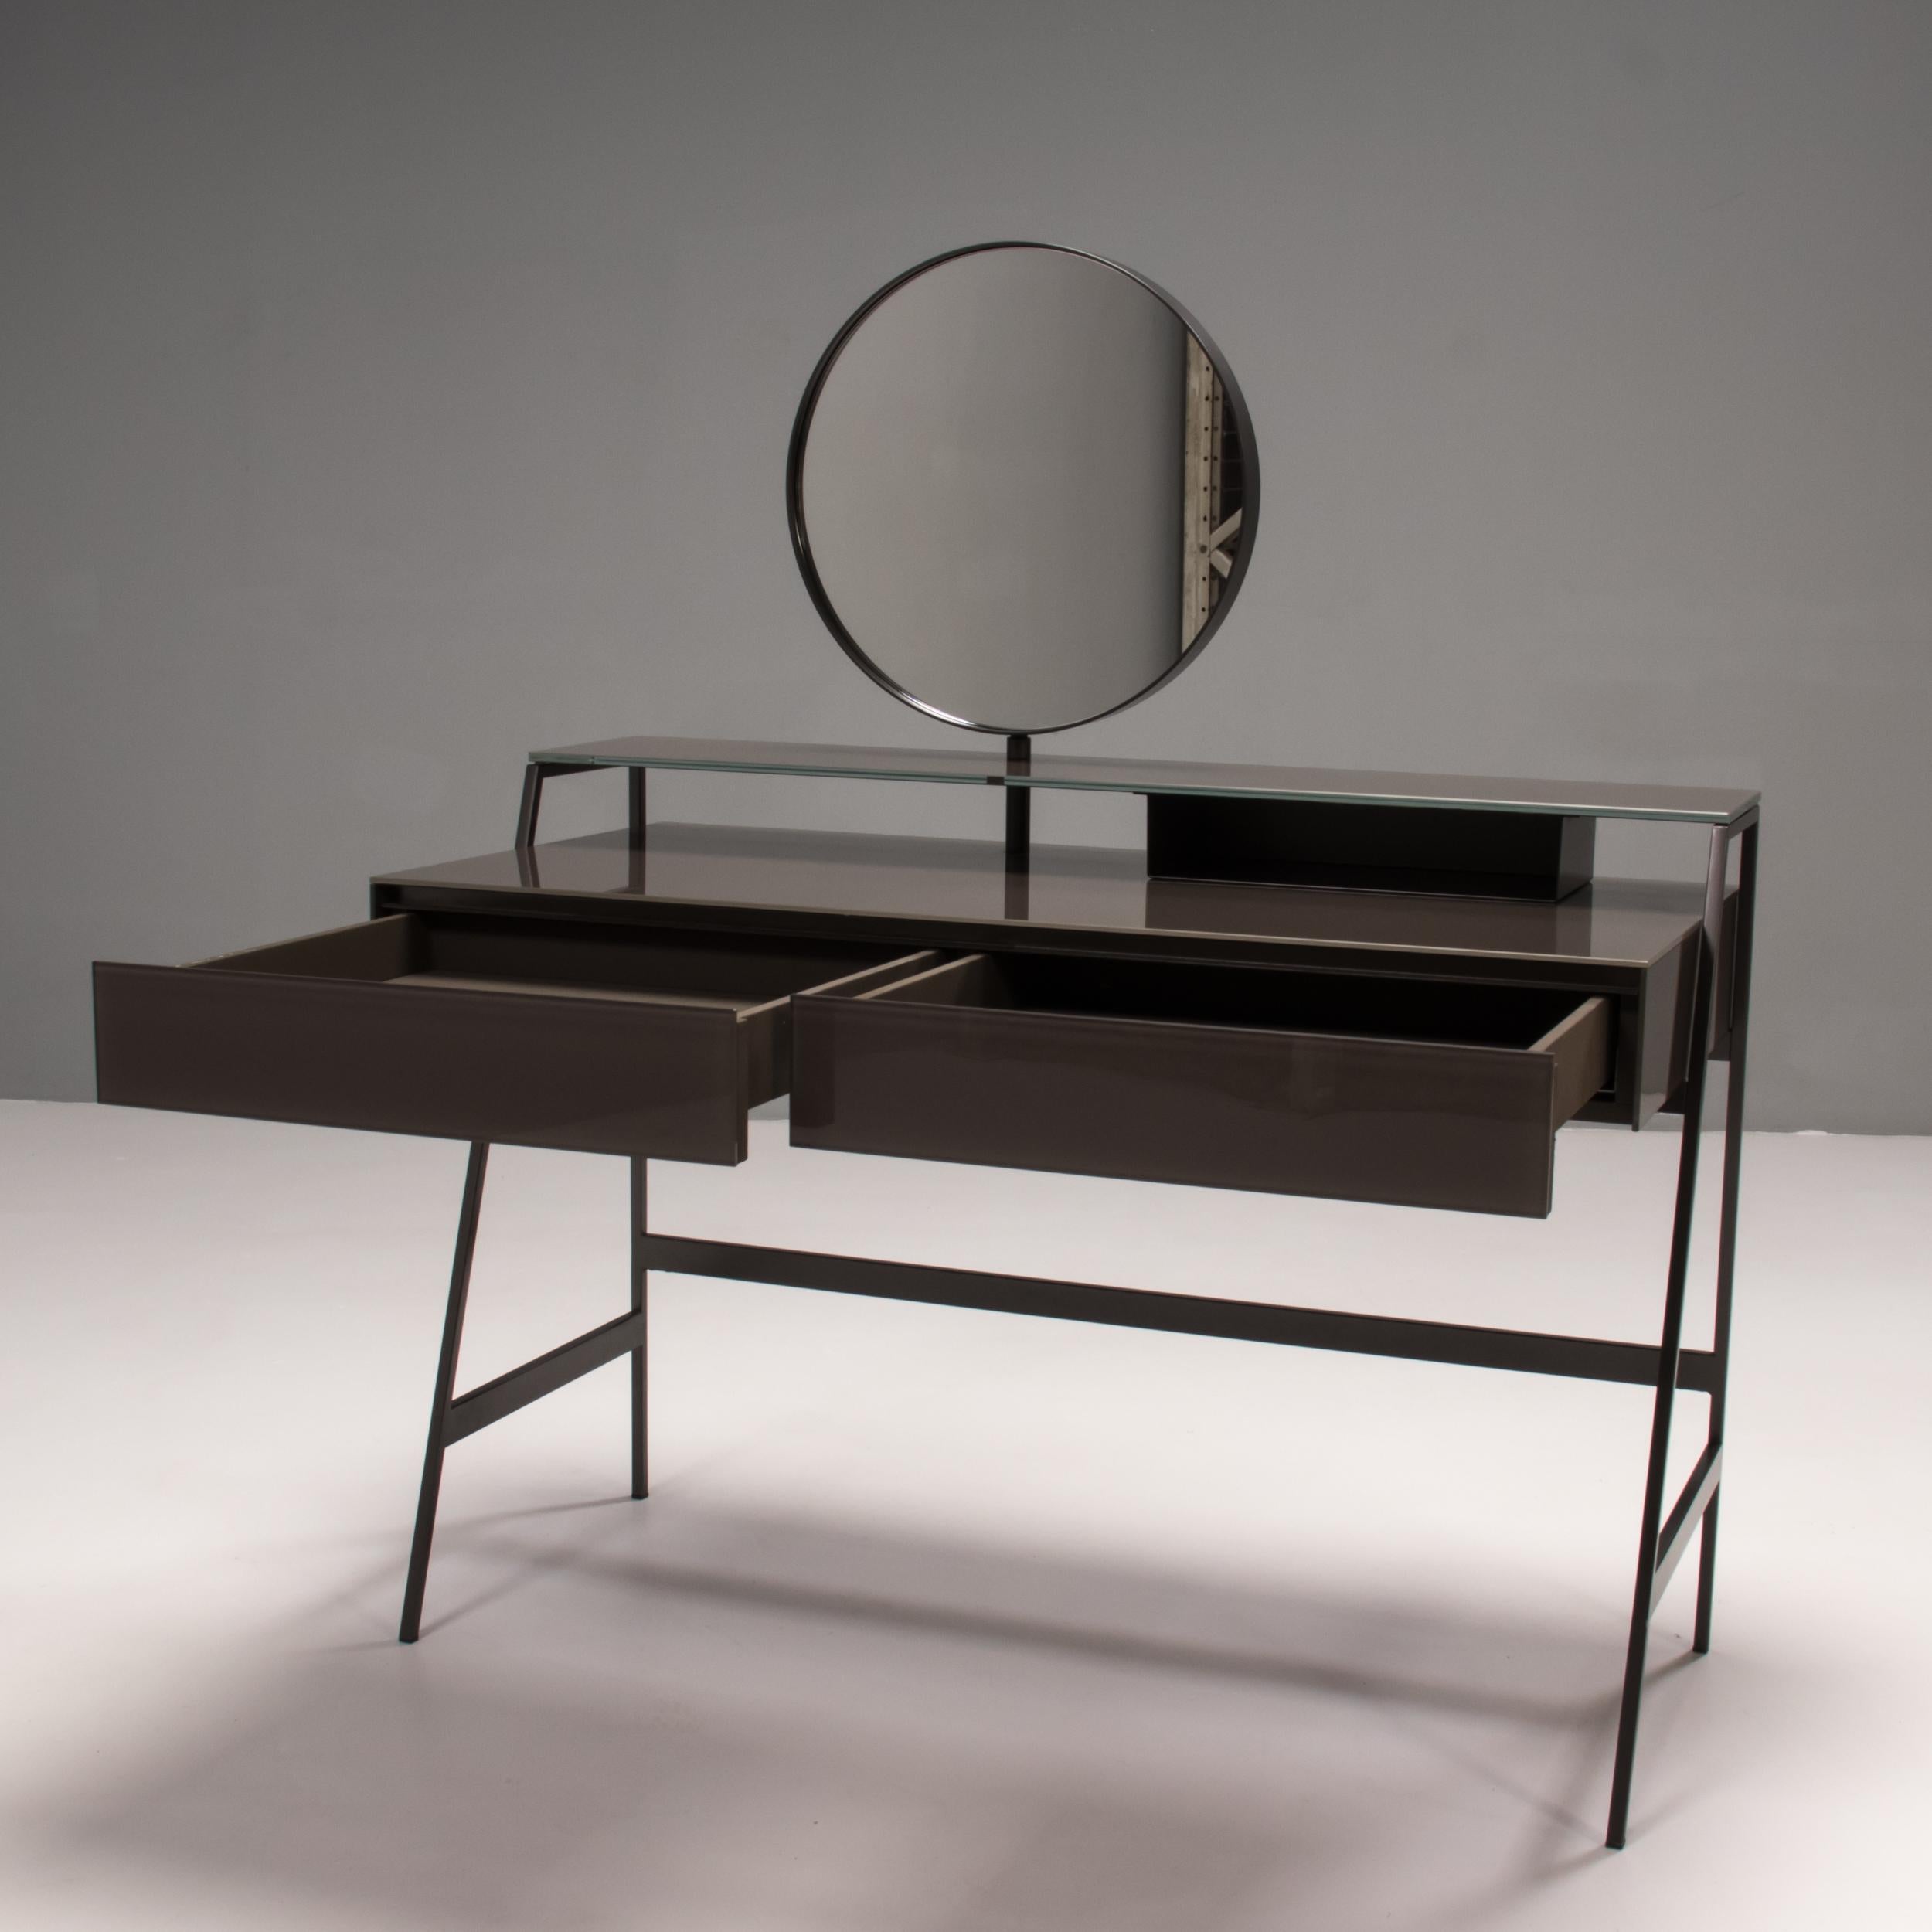 Designed by Carlo Colombo for Gallotti & Radice in 2013, the Venere vanity desk is an incredibly versatile piece of modern design.

Constructed from solid wood with a painted glass finish and a burnished metal frame, the vanity features a shelf